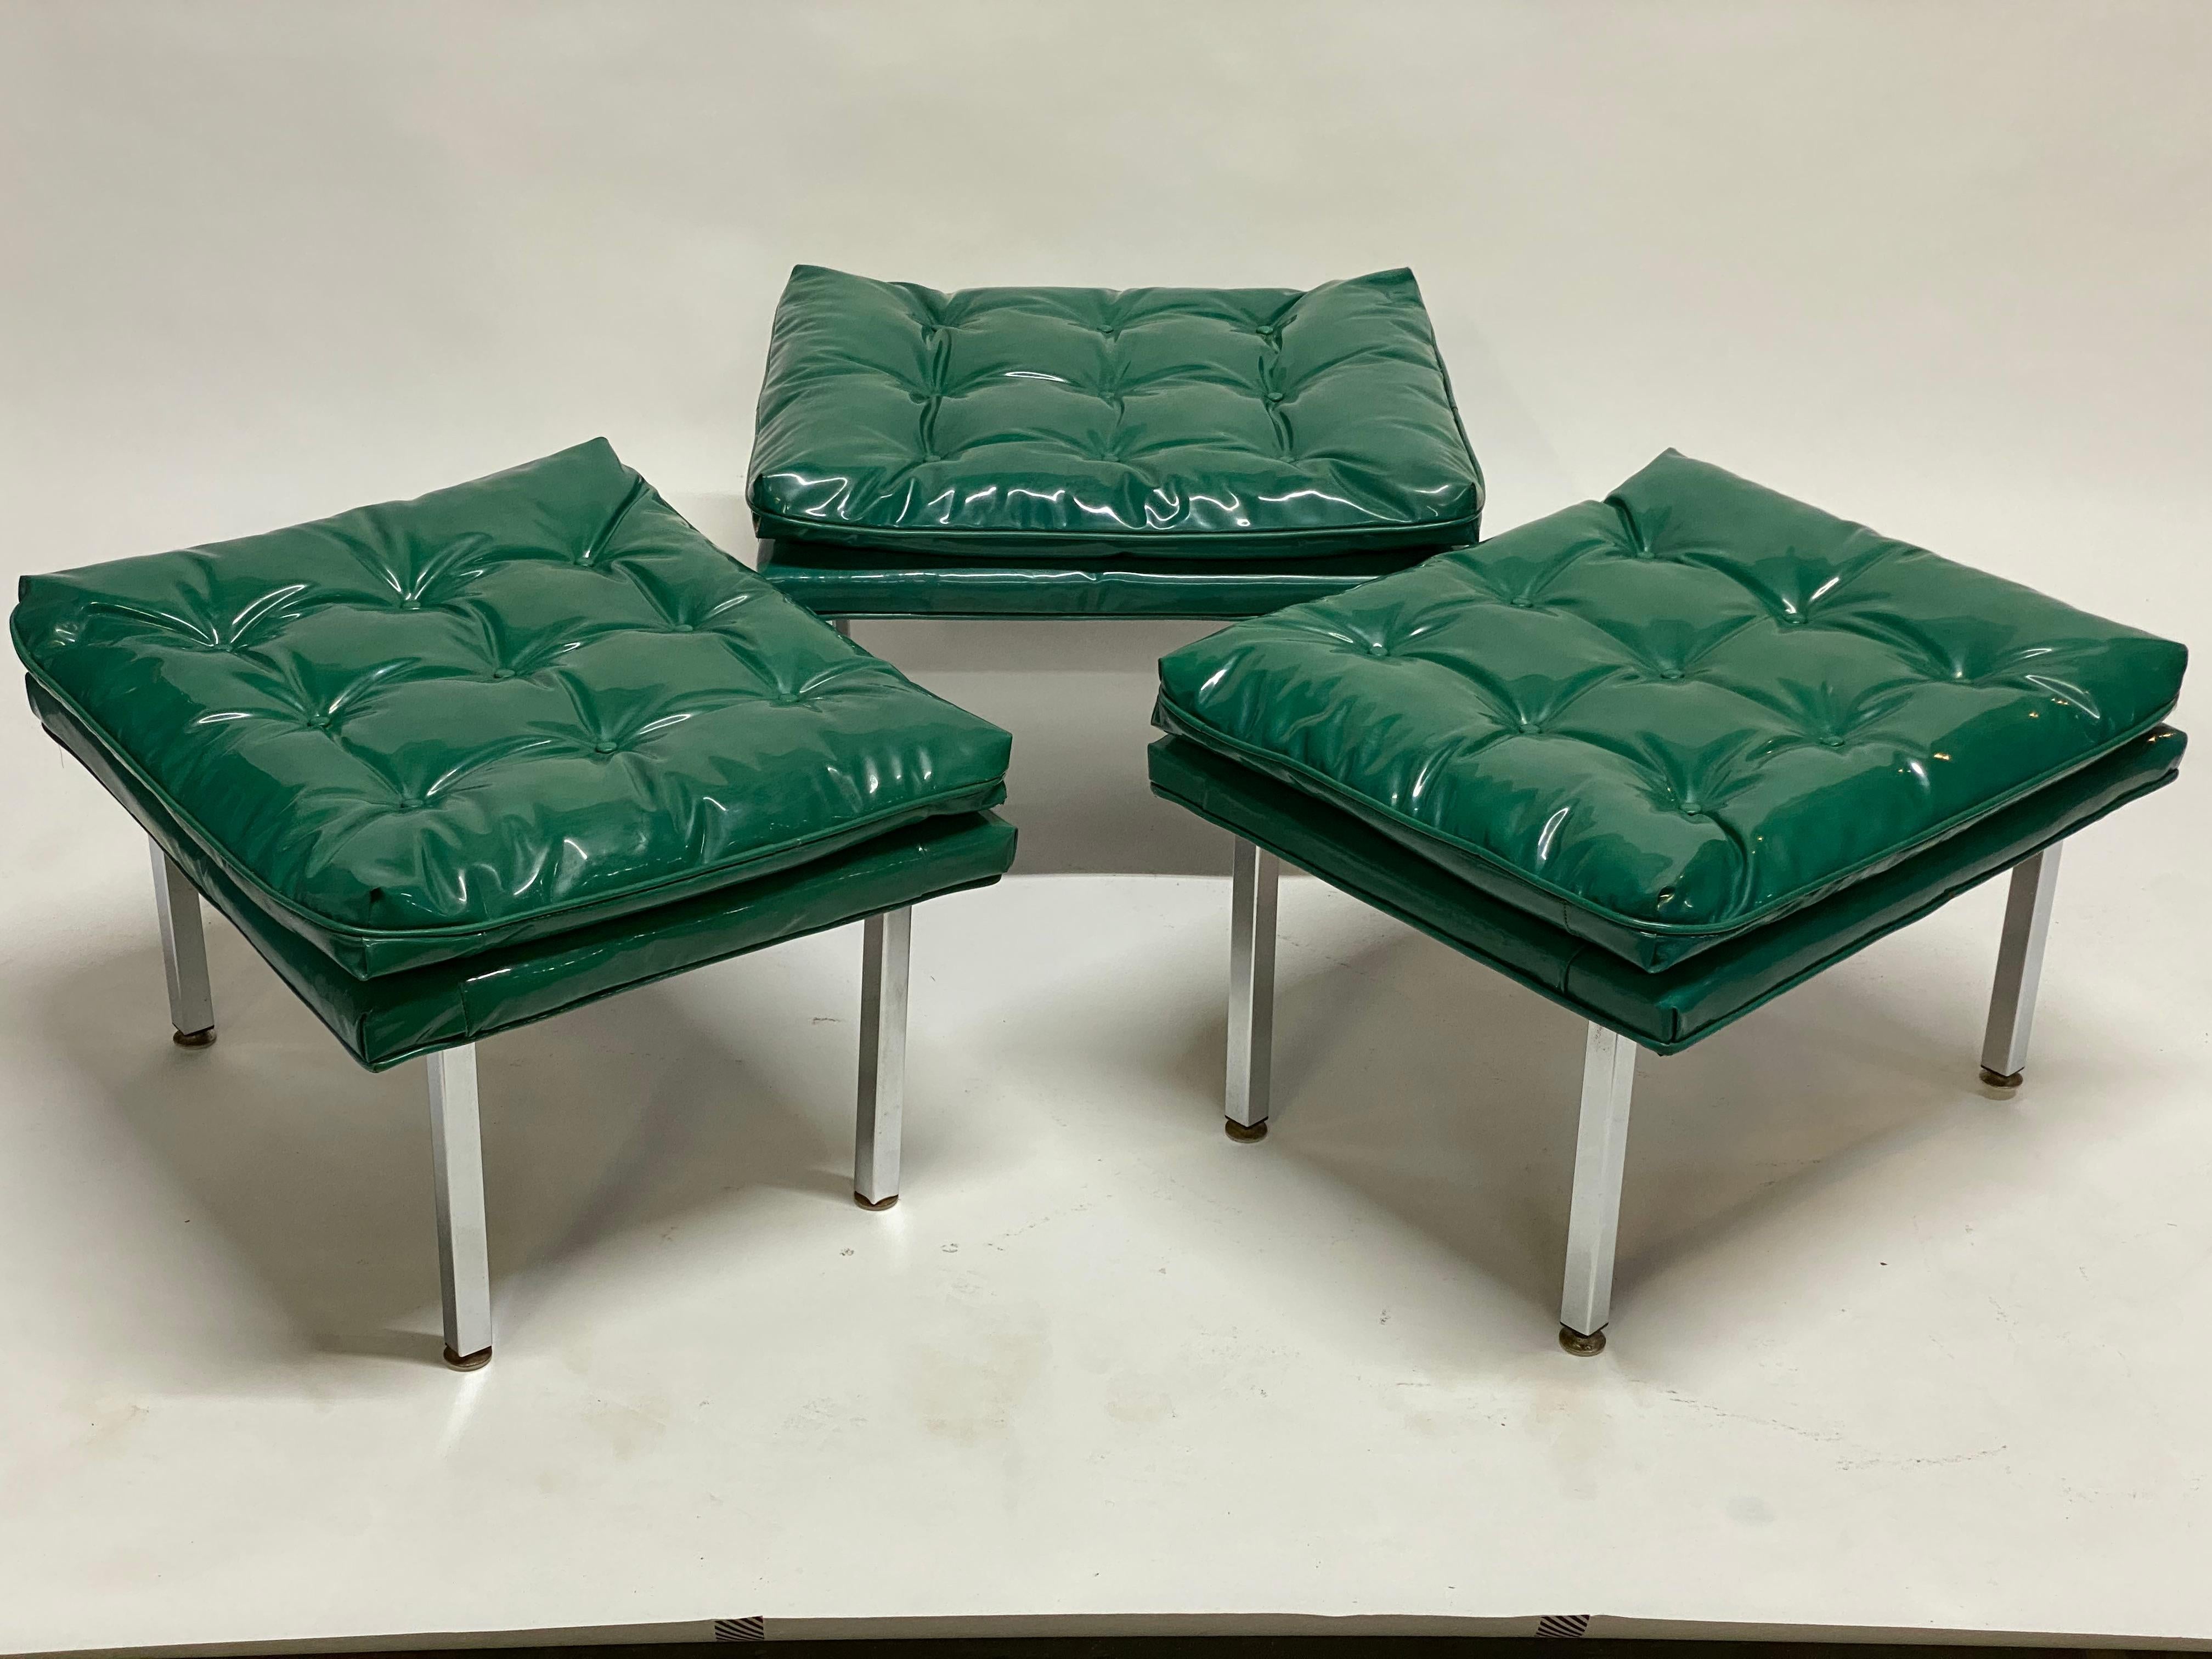 A set of three glossy and bright kelly green tufted vinyl seat benches or stools with squared aluminum legs. circa 1970. Could also possibly be used as ottomans. Great styled together giving a long bench affect or used separately as a distinctly